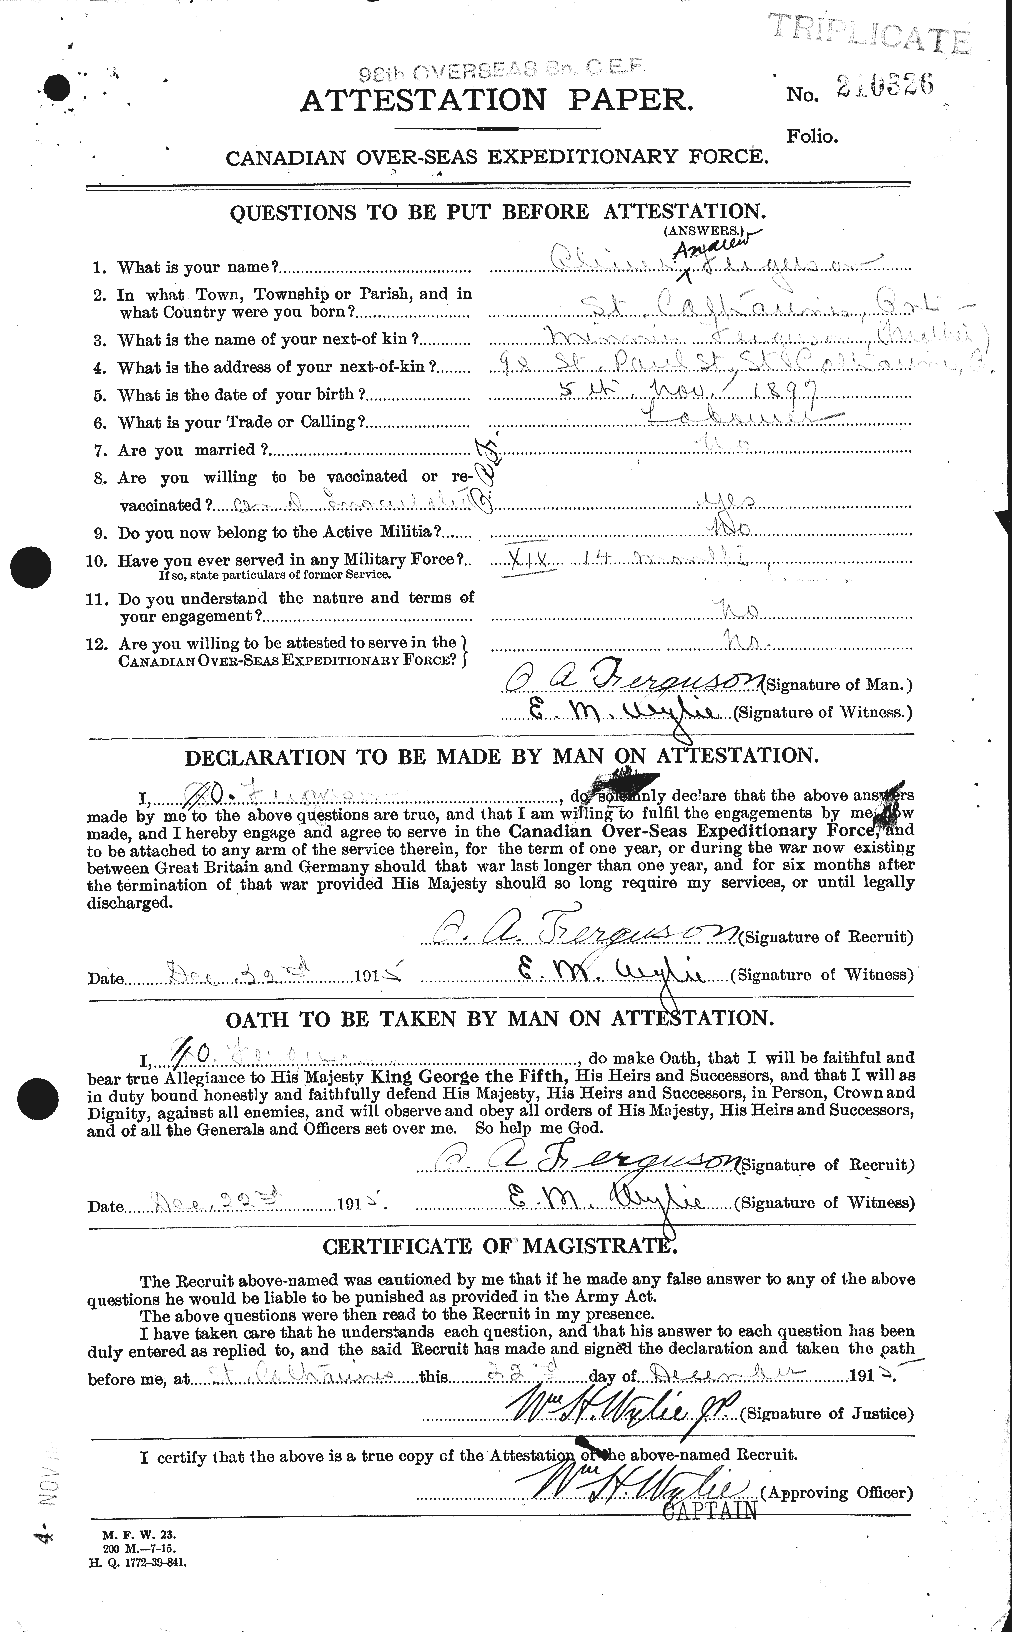 Personnel Records of the First World War - CEF 321197a